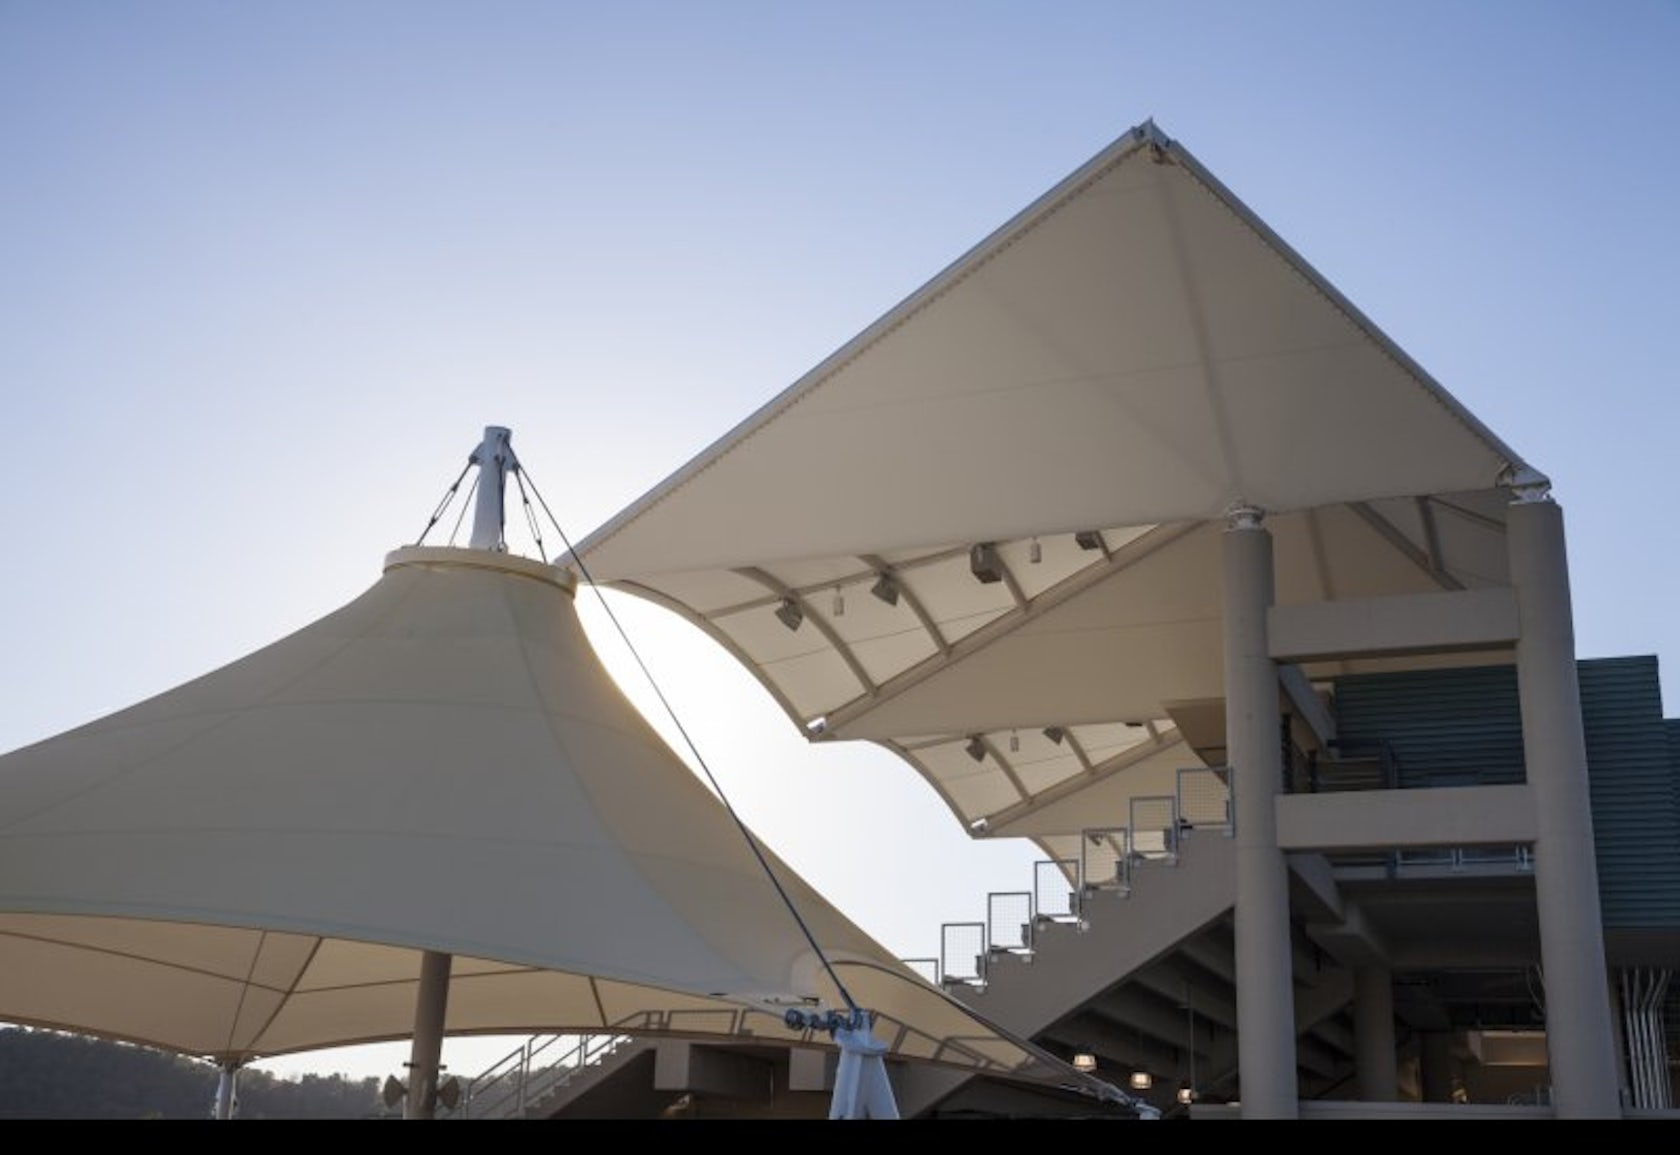 Park Grandstand Canopies by Marnell Architecture - Architizer